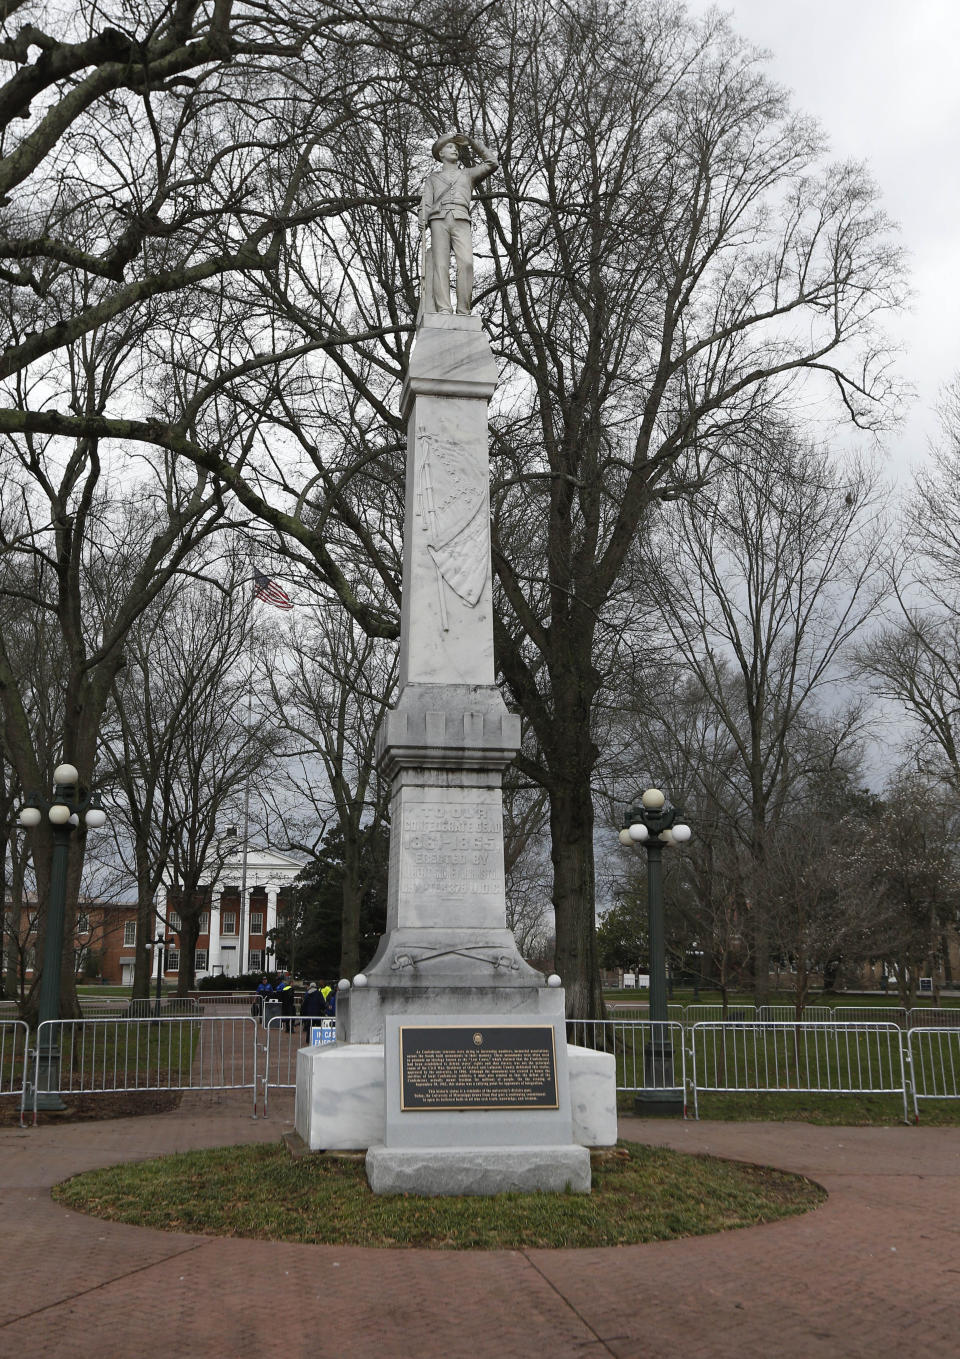 This is a Feb. 23, 2019 photograph of the Confederate soldier monument at the University of Mississippi in Oxford, Miss. The Associated Student Body Senate voted 47-0, Tuesday night, March 5, 2019, for a resolution asking the university's administrators to move the statue to the Confederate cemetery, behind the Tad Smith Coliseum, also on campus. (AP Photo/Rogelio V. Solis)